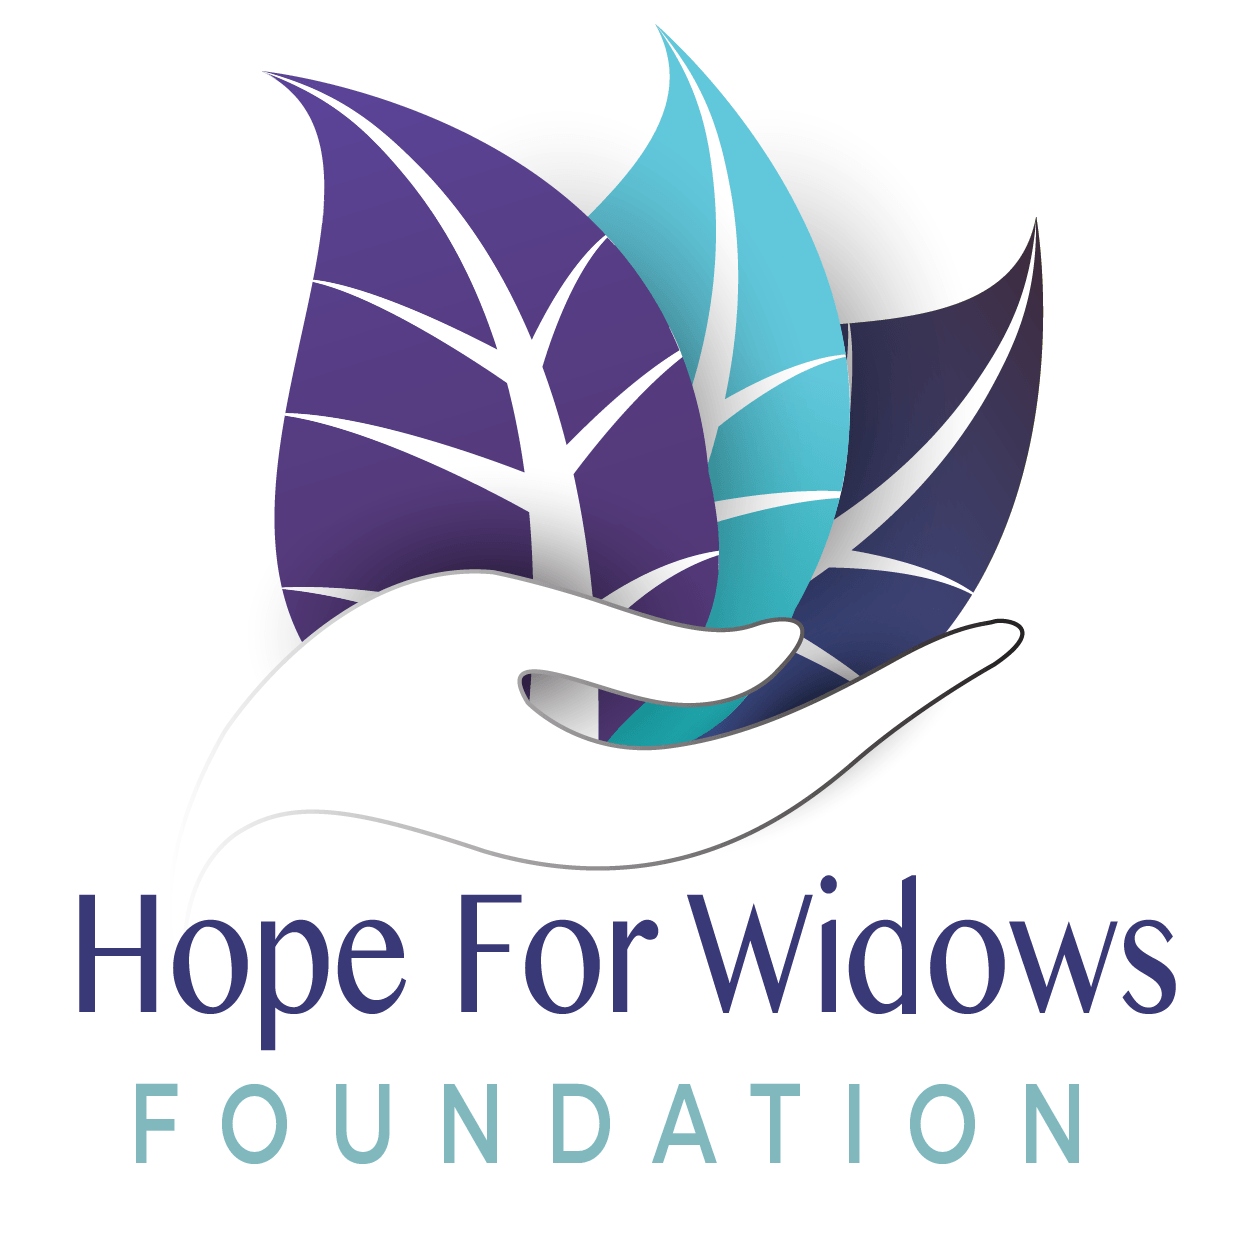 Hope for Widows Foundation Sharing Solace